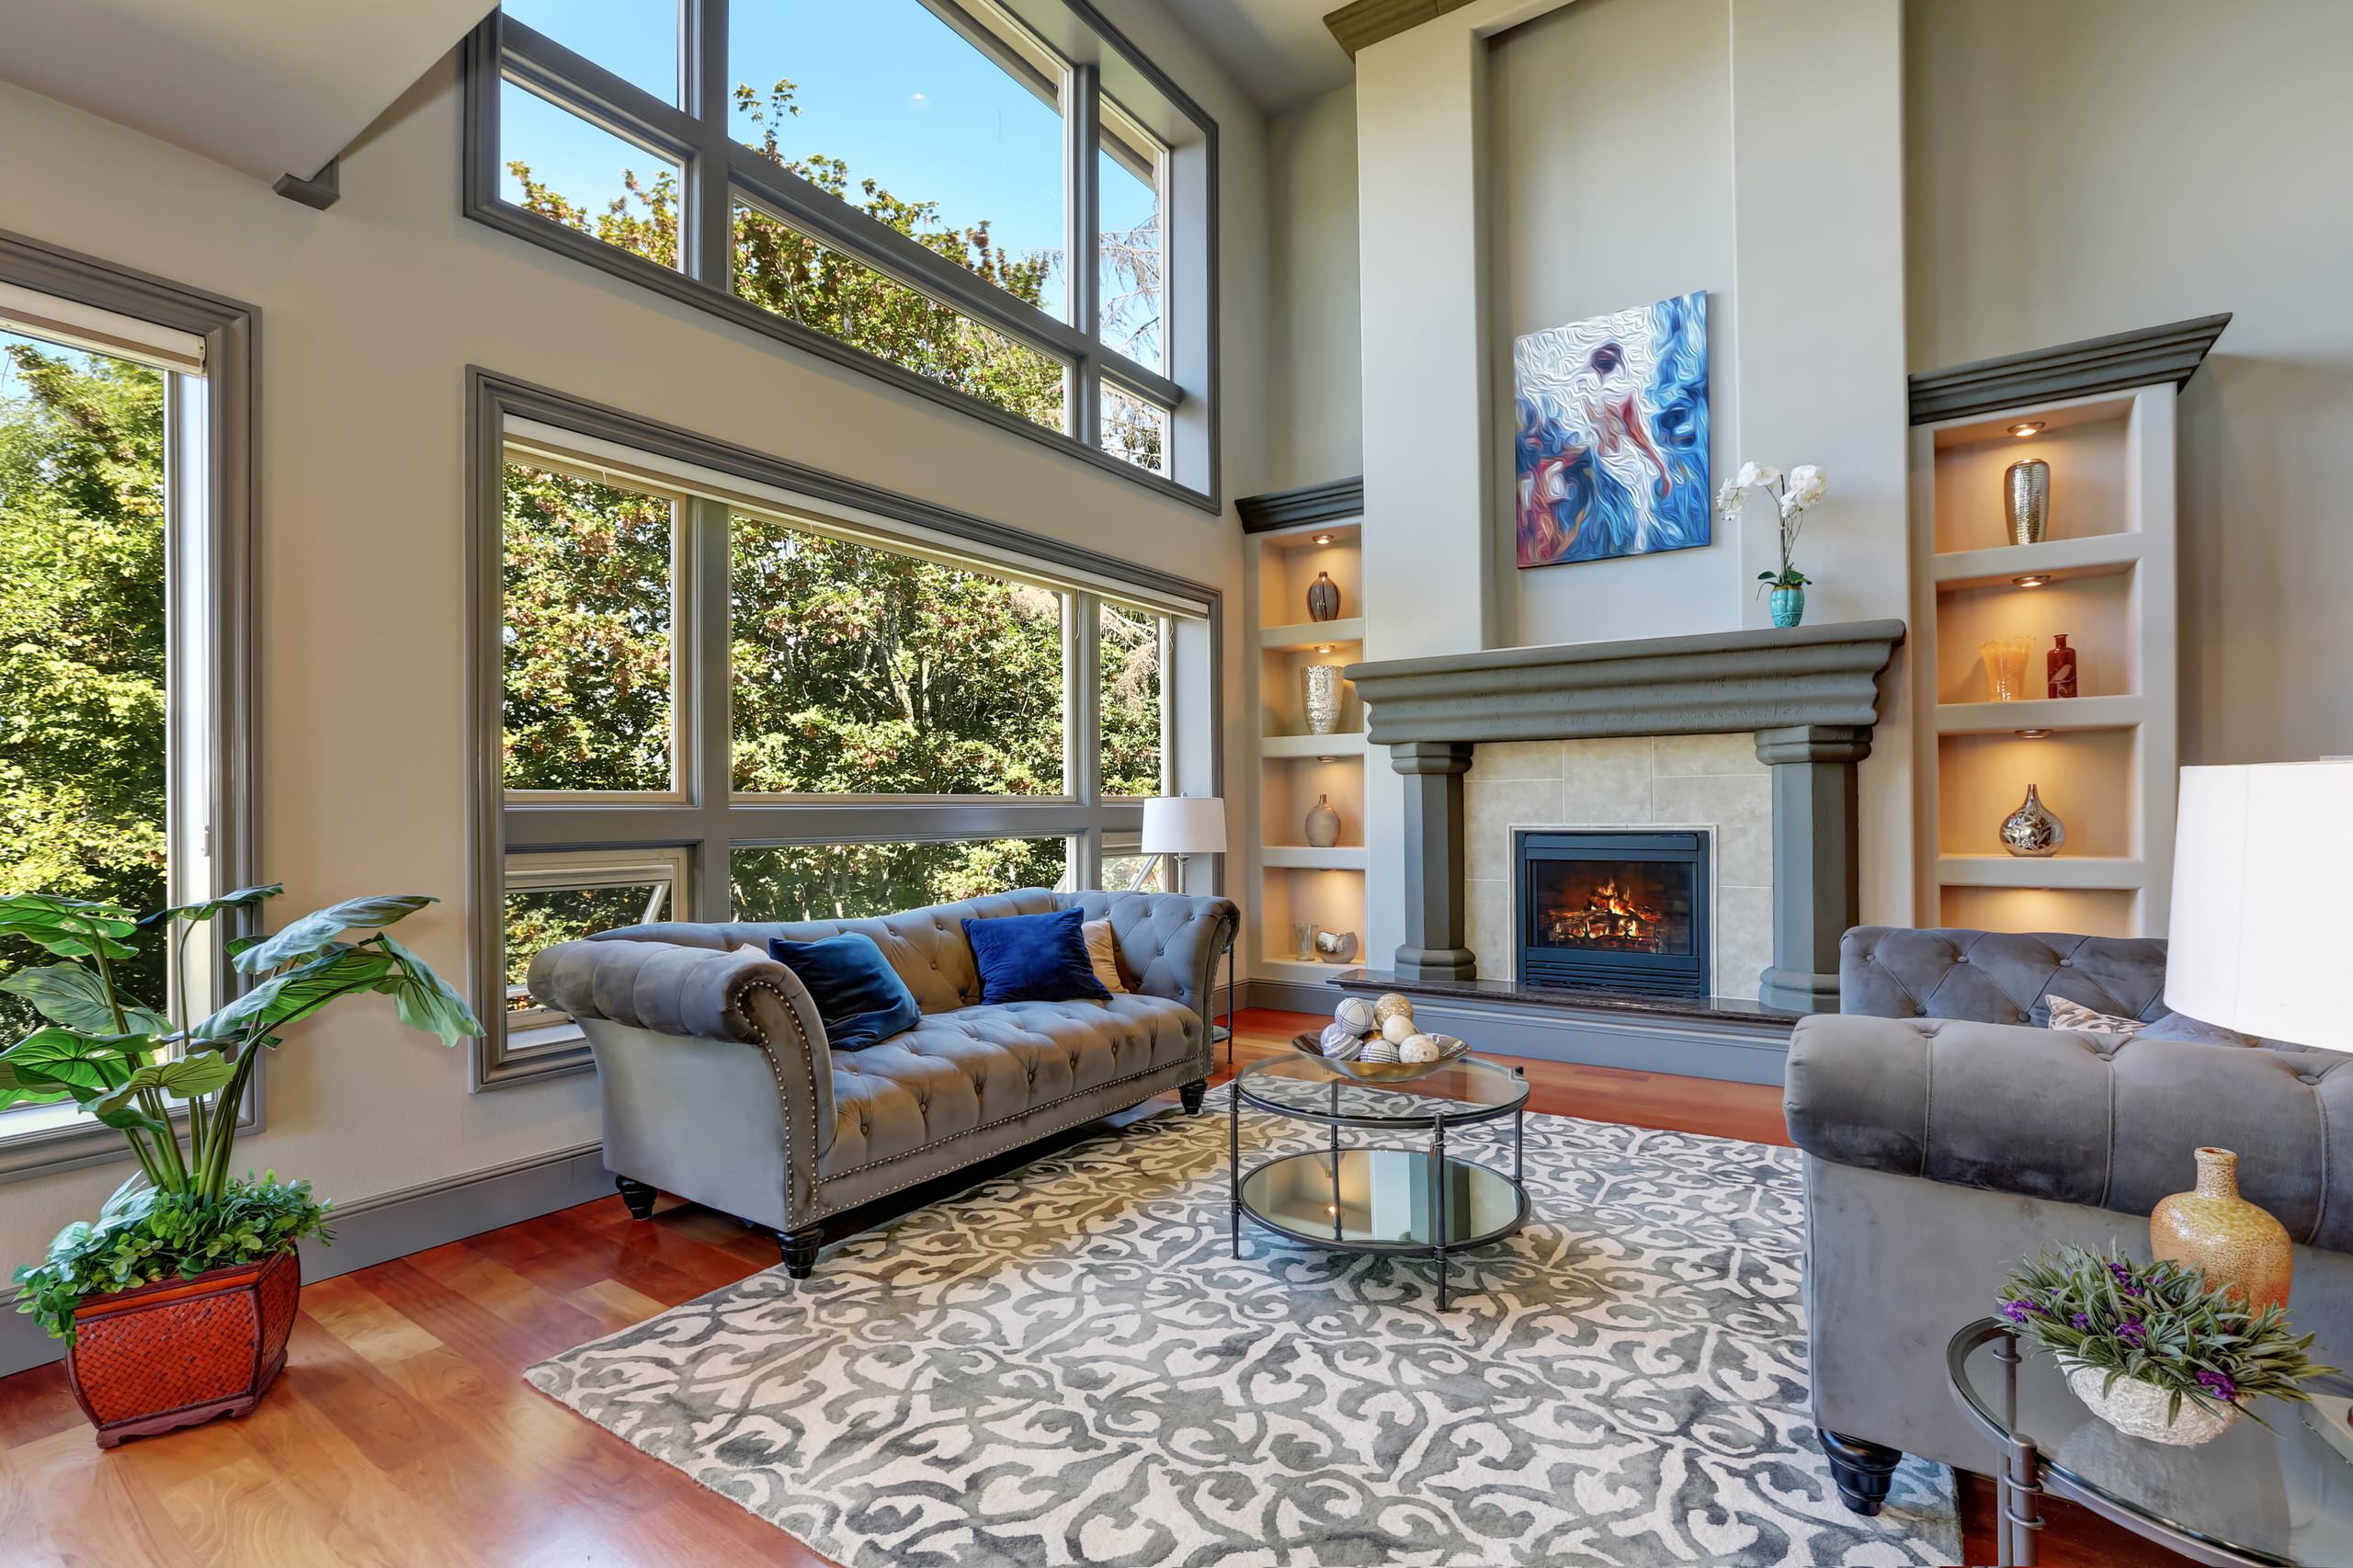 75 Living Room Ideas You'll Love - July, 2023 | Houzz